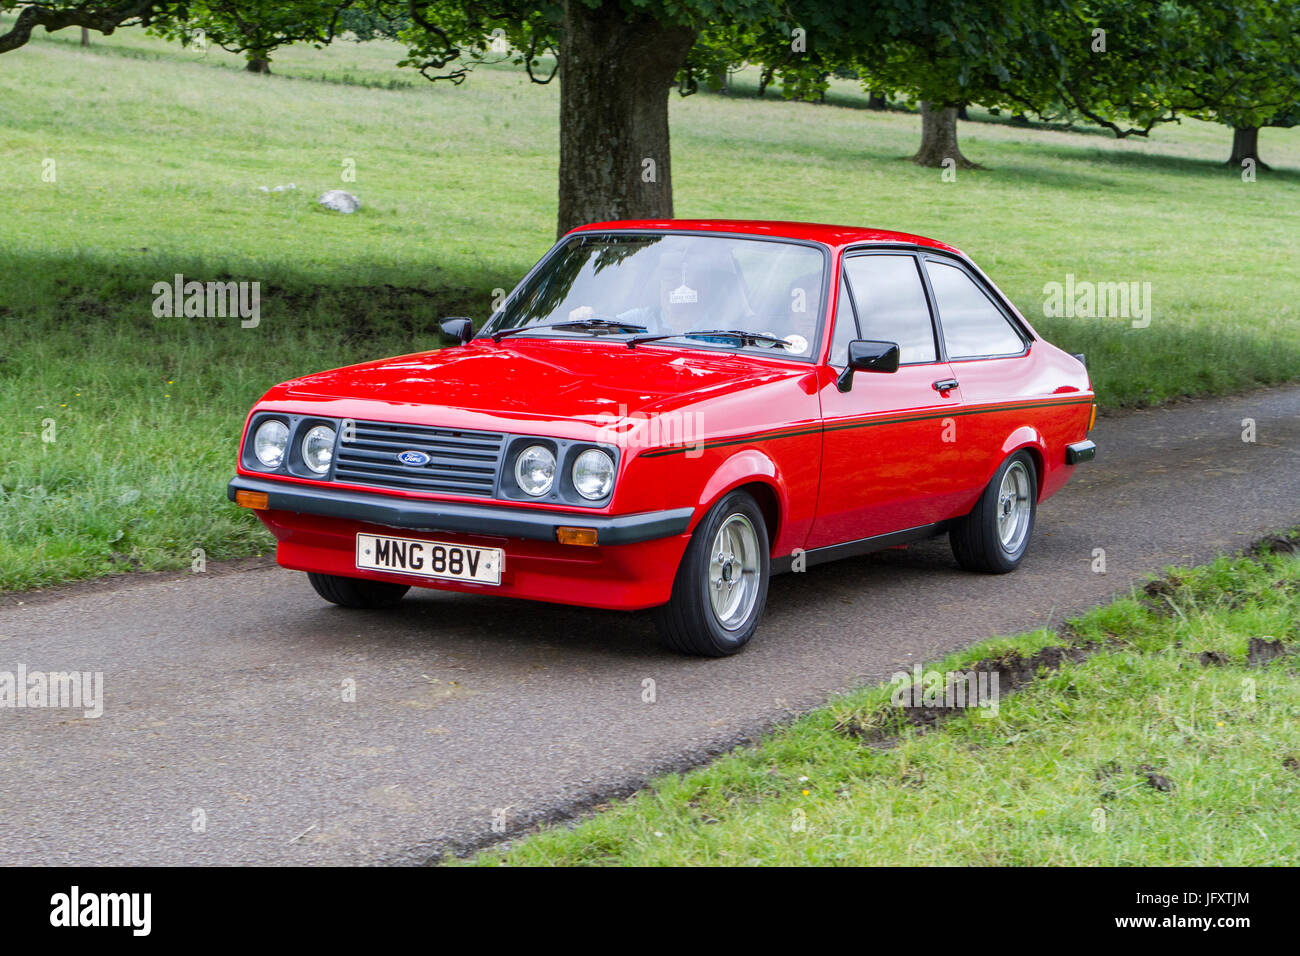 Mekaniker vejviser Gulerod MNG88V 1980 red Ford Escort RS Custom at Mark Woodward Classic Events,  classic cars, classic cars, cherished, veteran, old timer, vintage vehicles  Stock Photo - Alamy